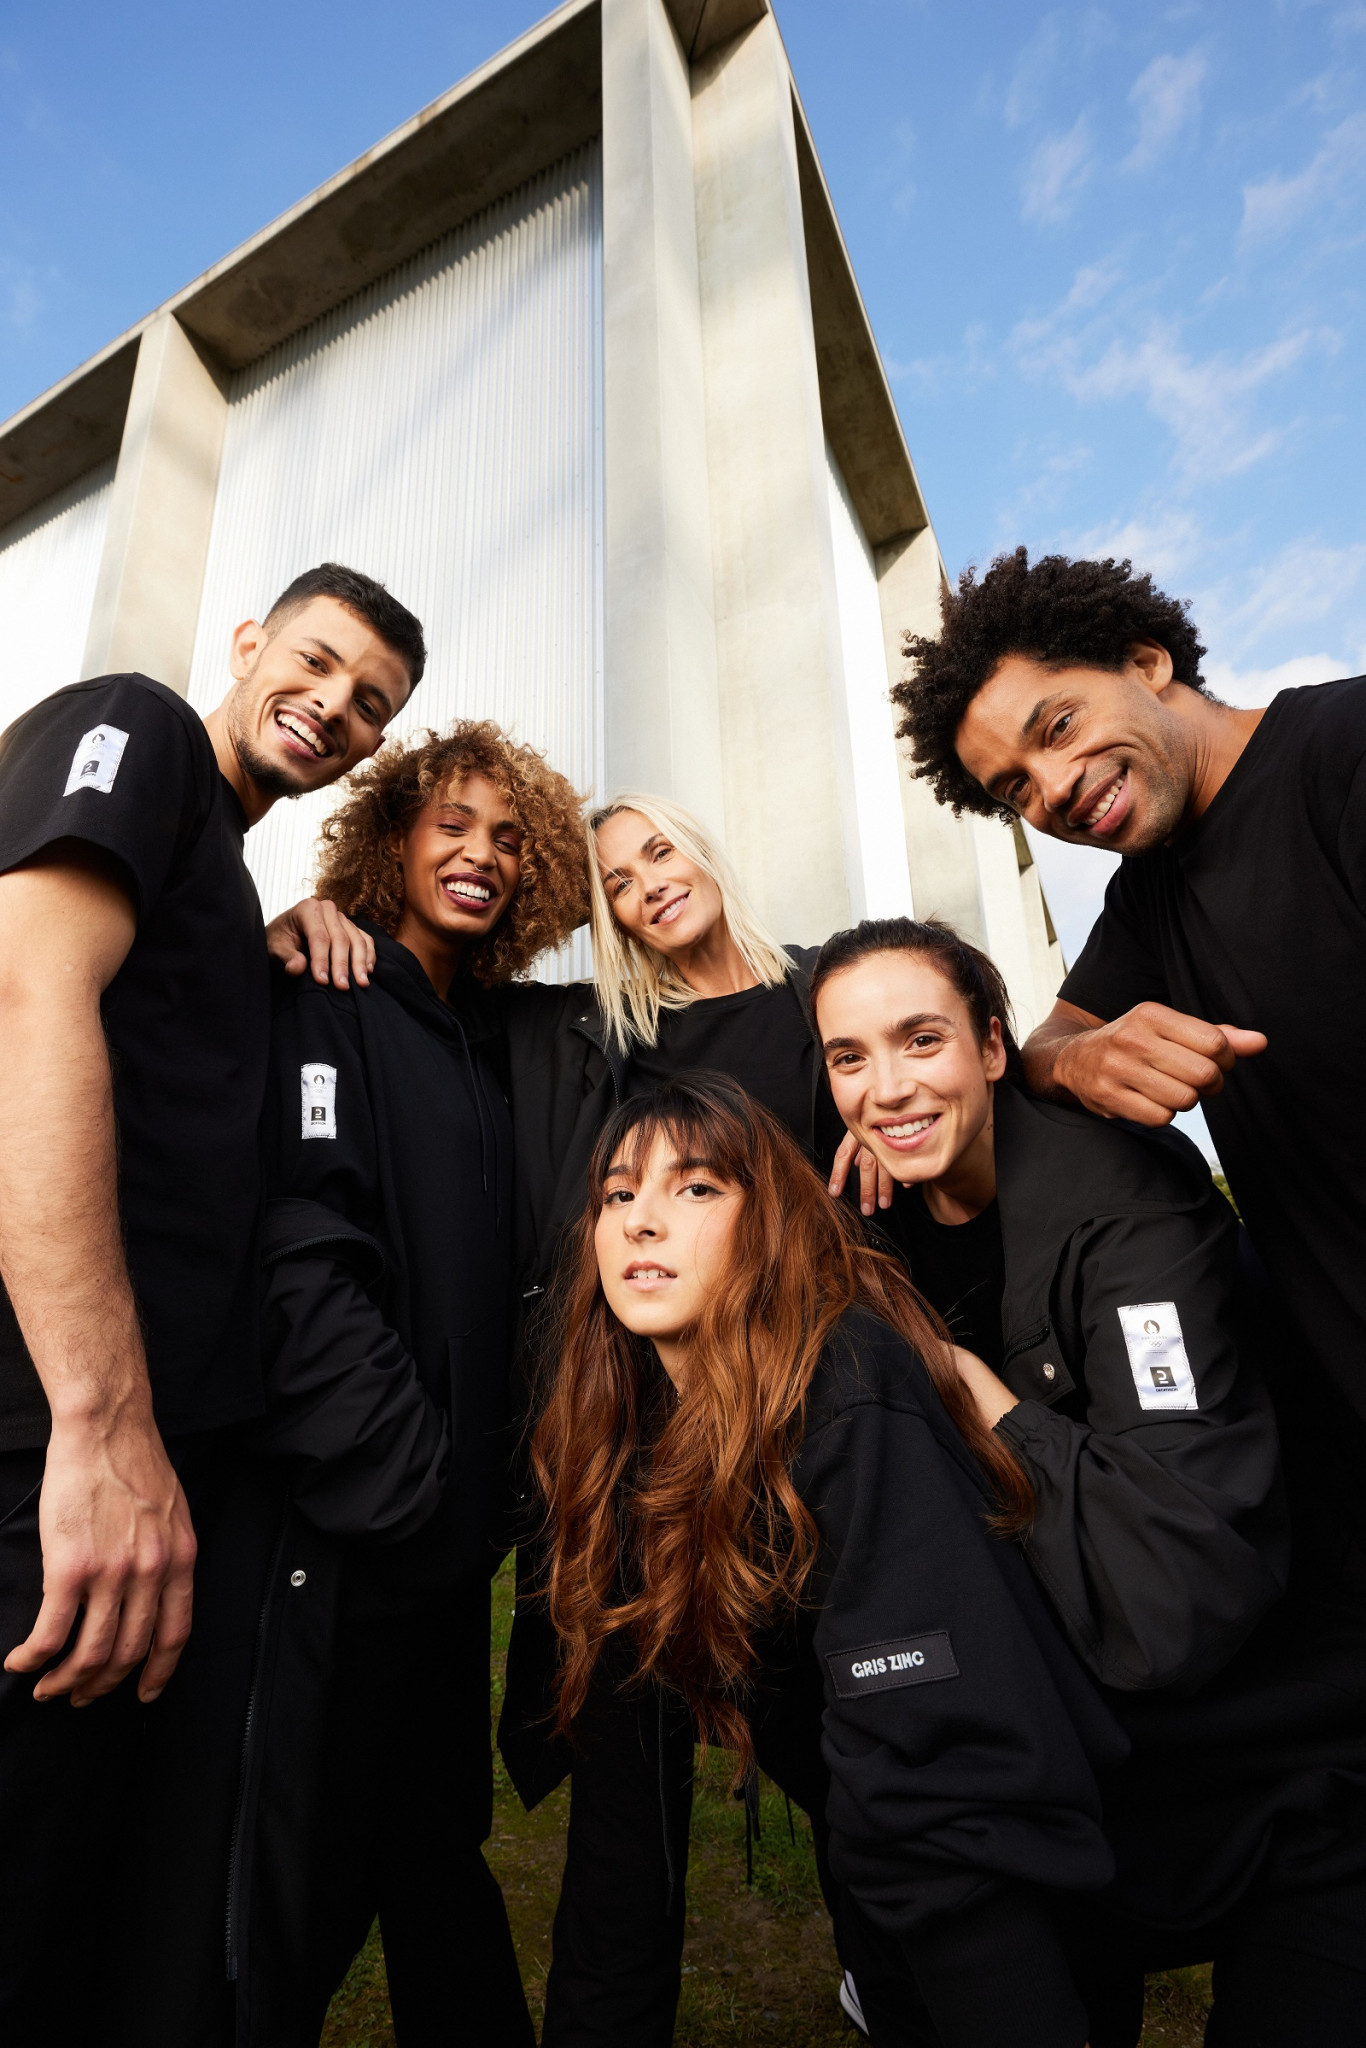 Tijana Kawashima Stojkovic, centre, has been signed up by Paris 2024 sponsor Decathlon to help launch its clothing range to mark 1,000 days until the start of the Olympic Games ©Decathlon